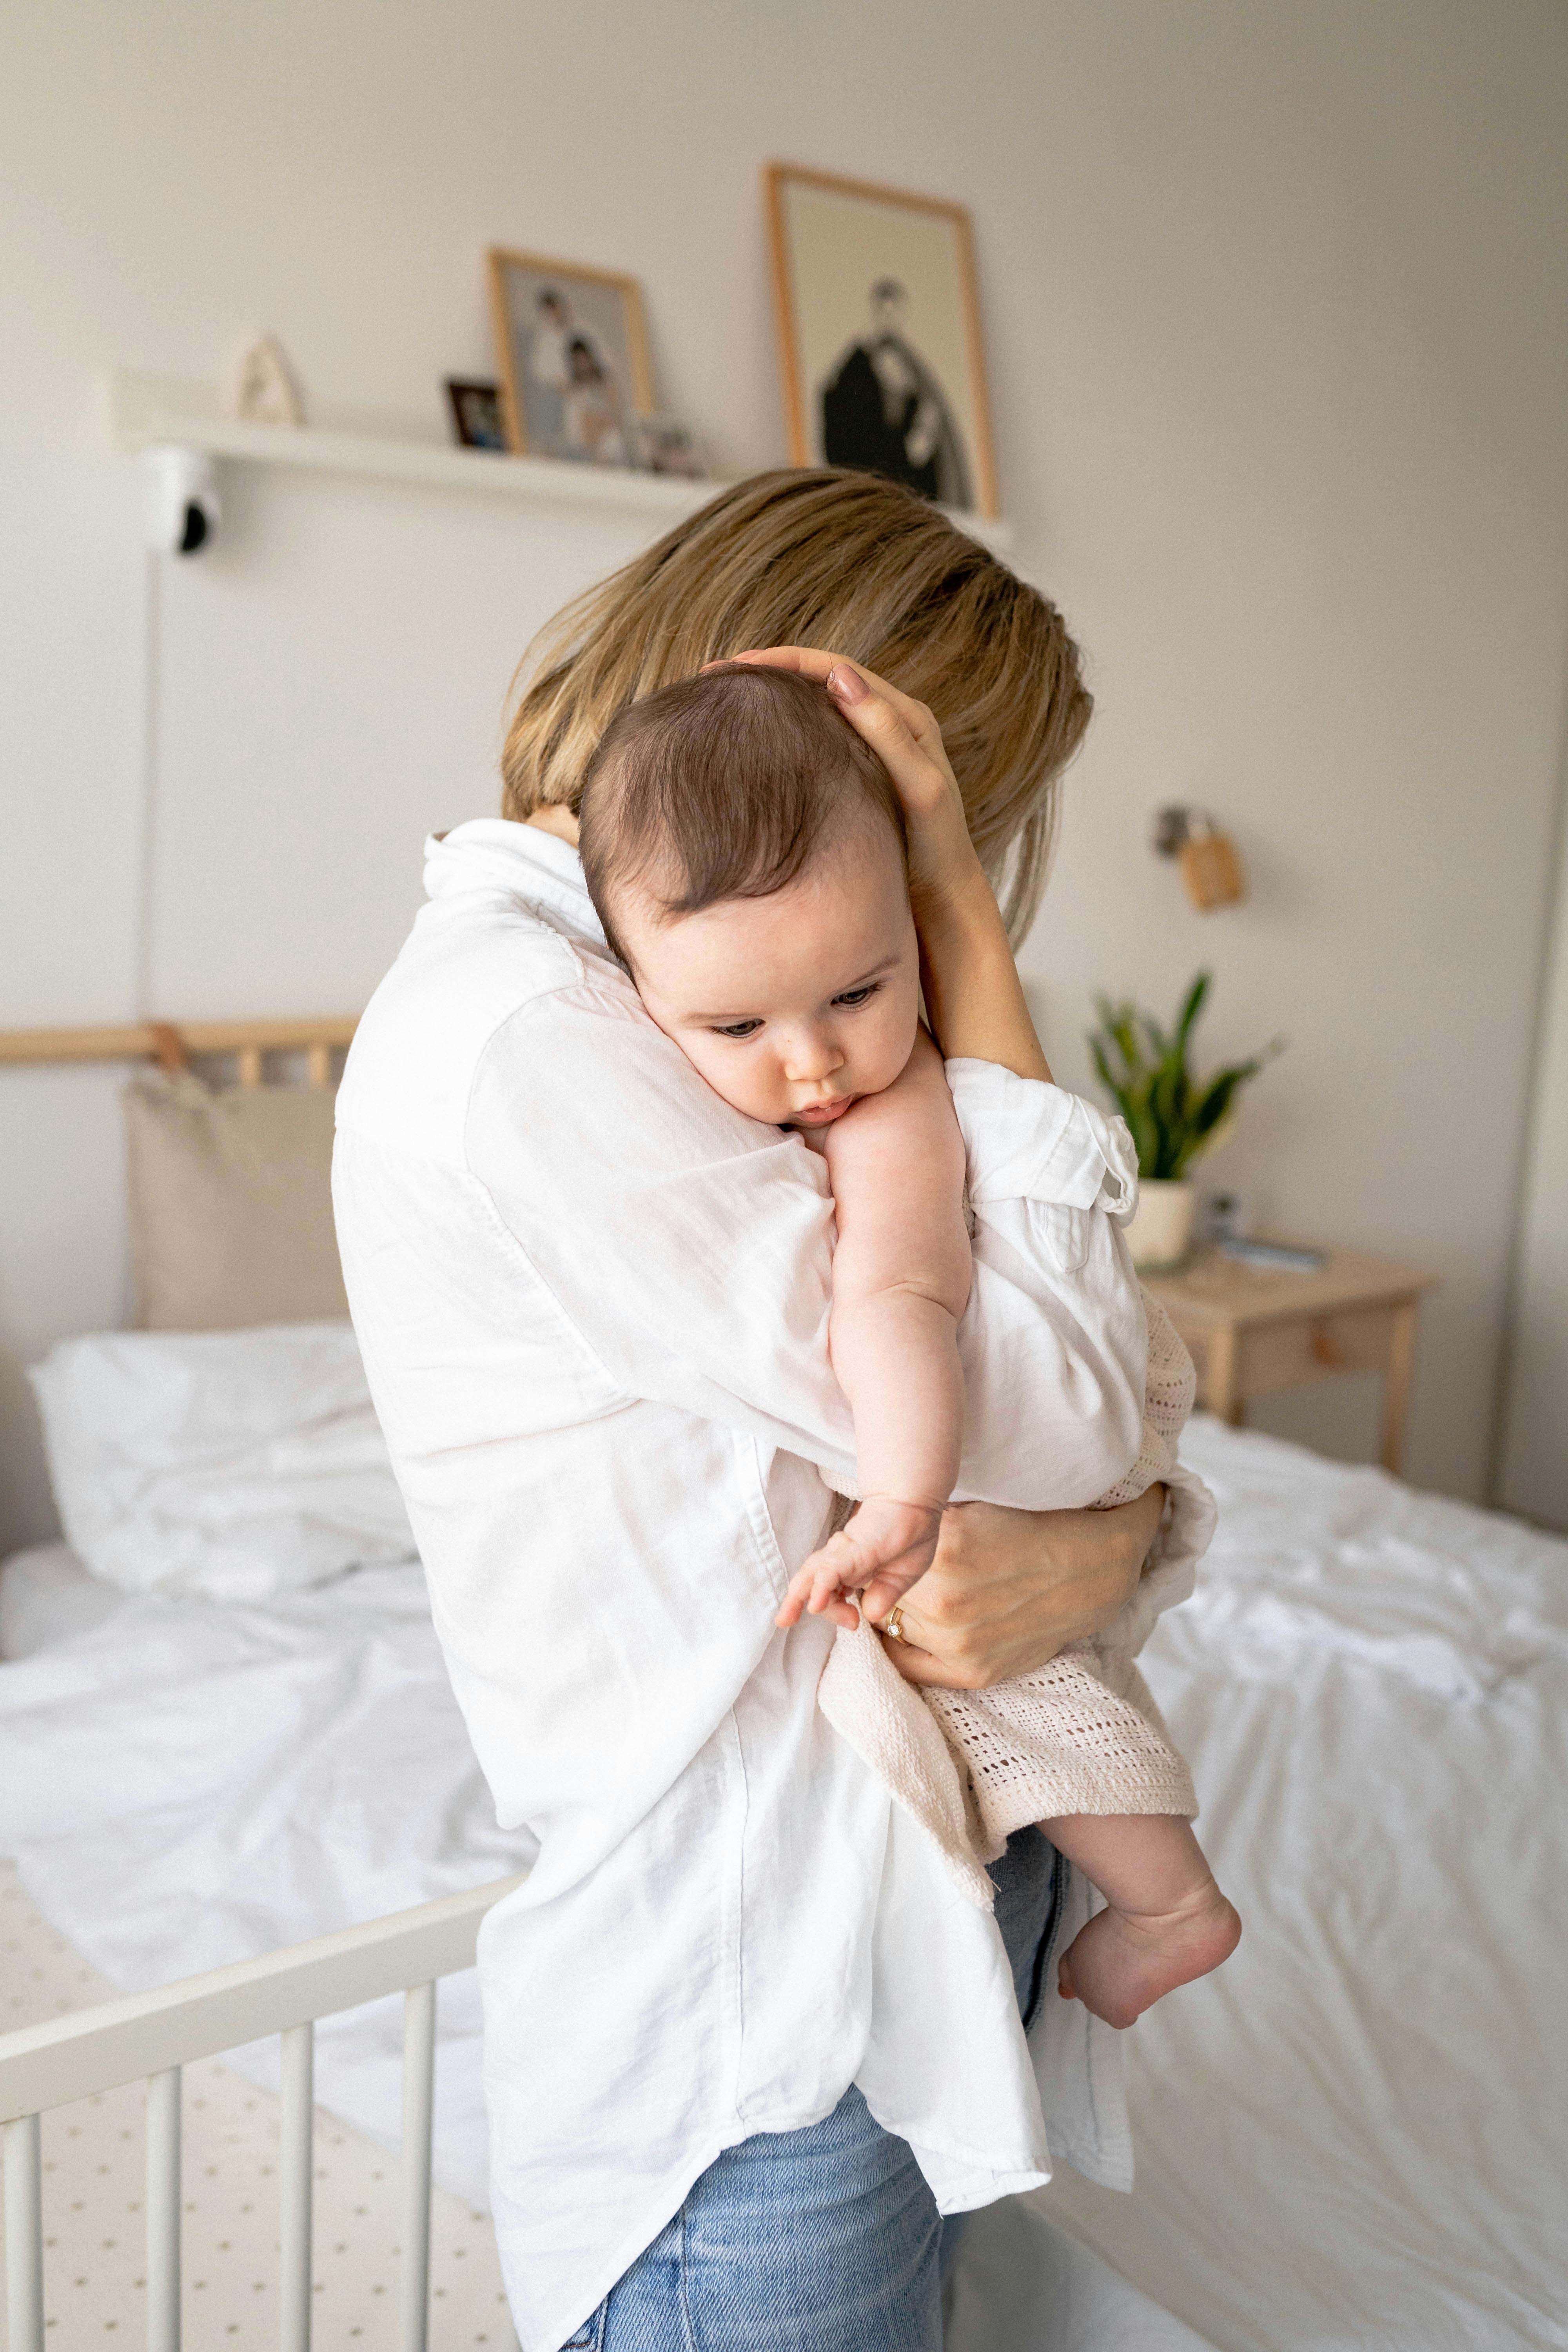 A woman hugging and holding her baby tight | Source: Pexels